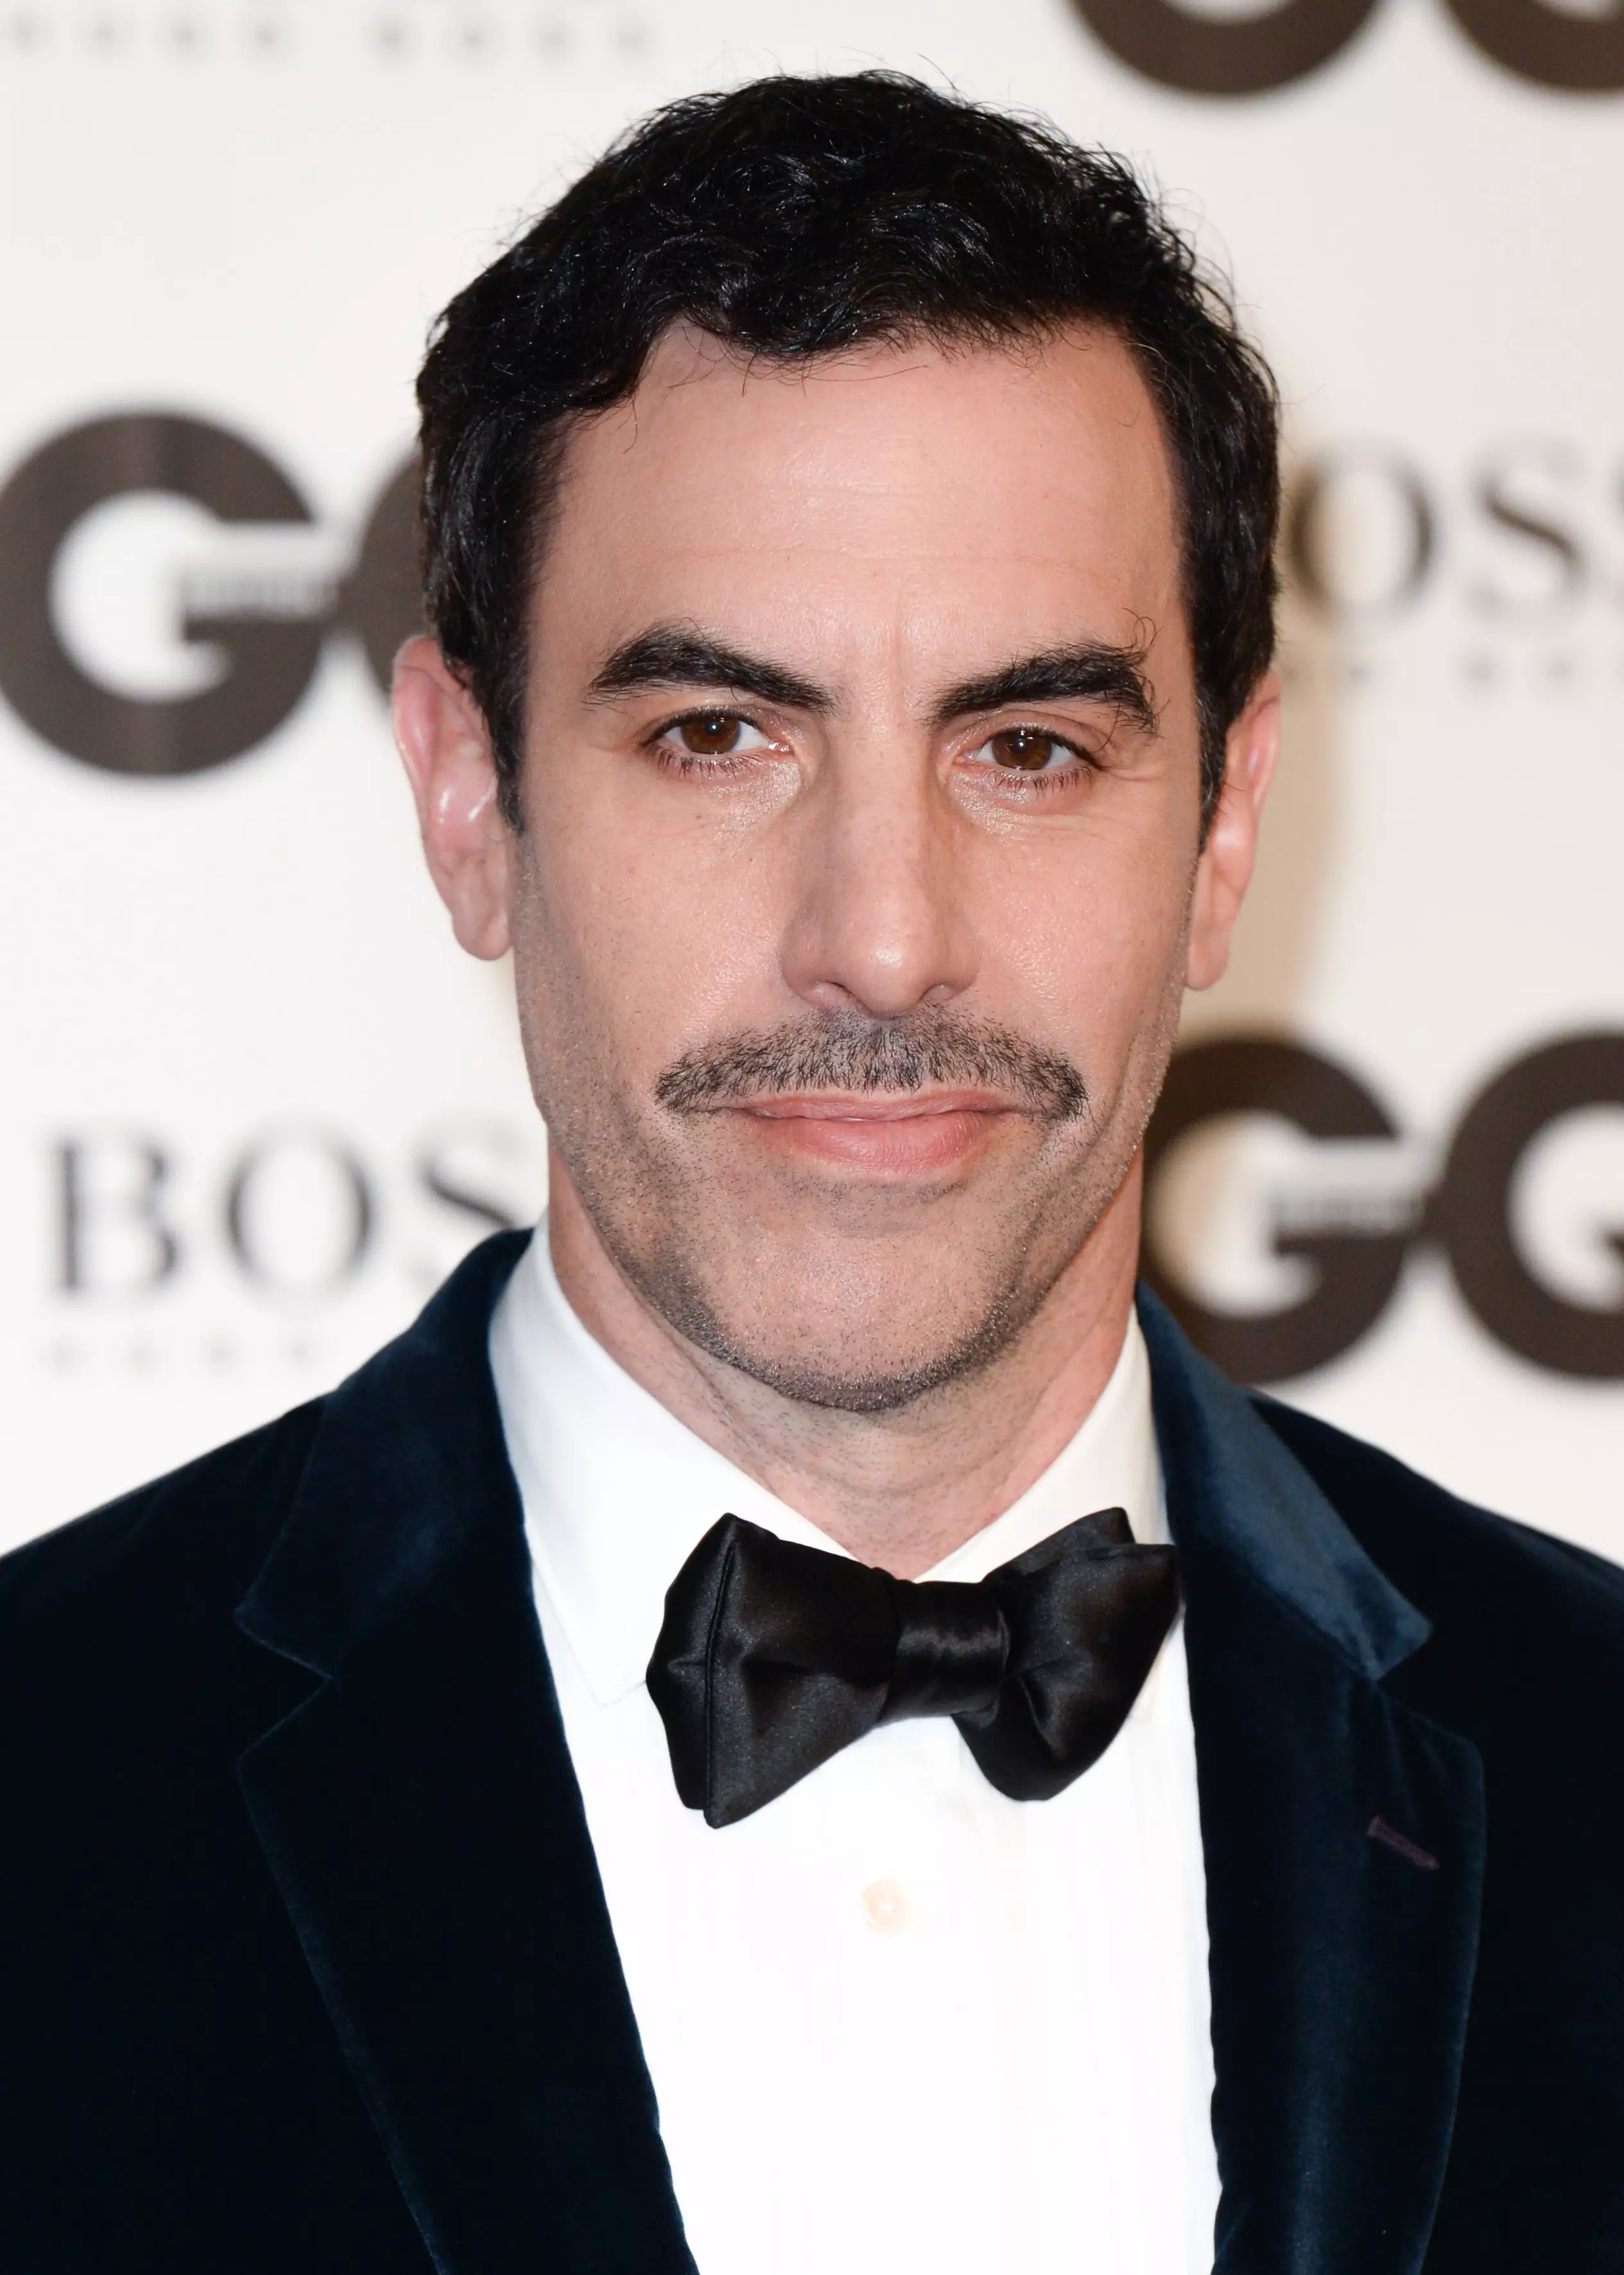 May says the Borat star would have been a 'disaster' choice to play Freddie Mercury.